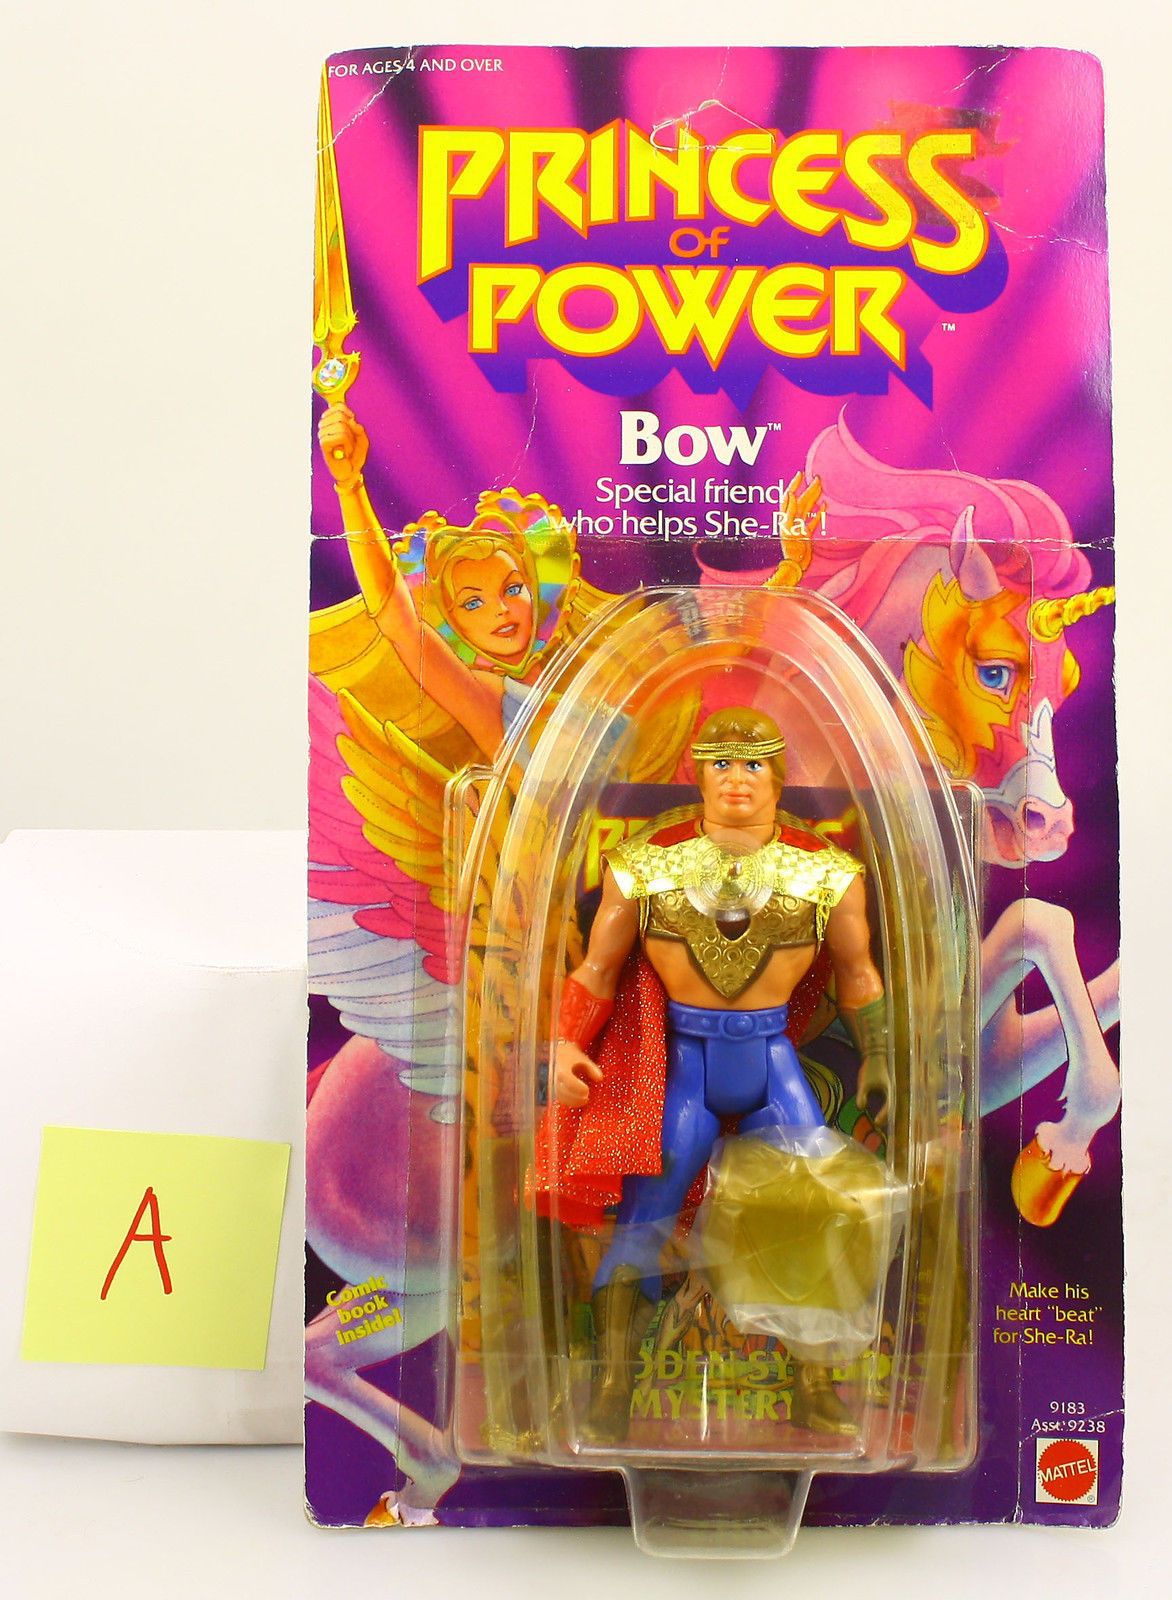 She-Ra: Princess of Power (1985) - (figures, dolls, toys and objects) 46